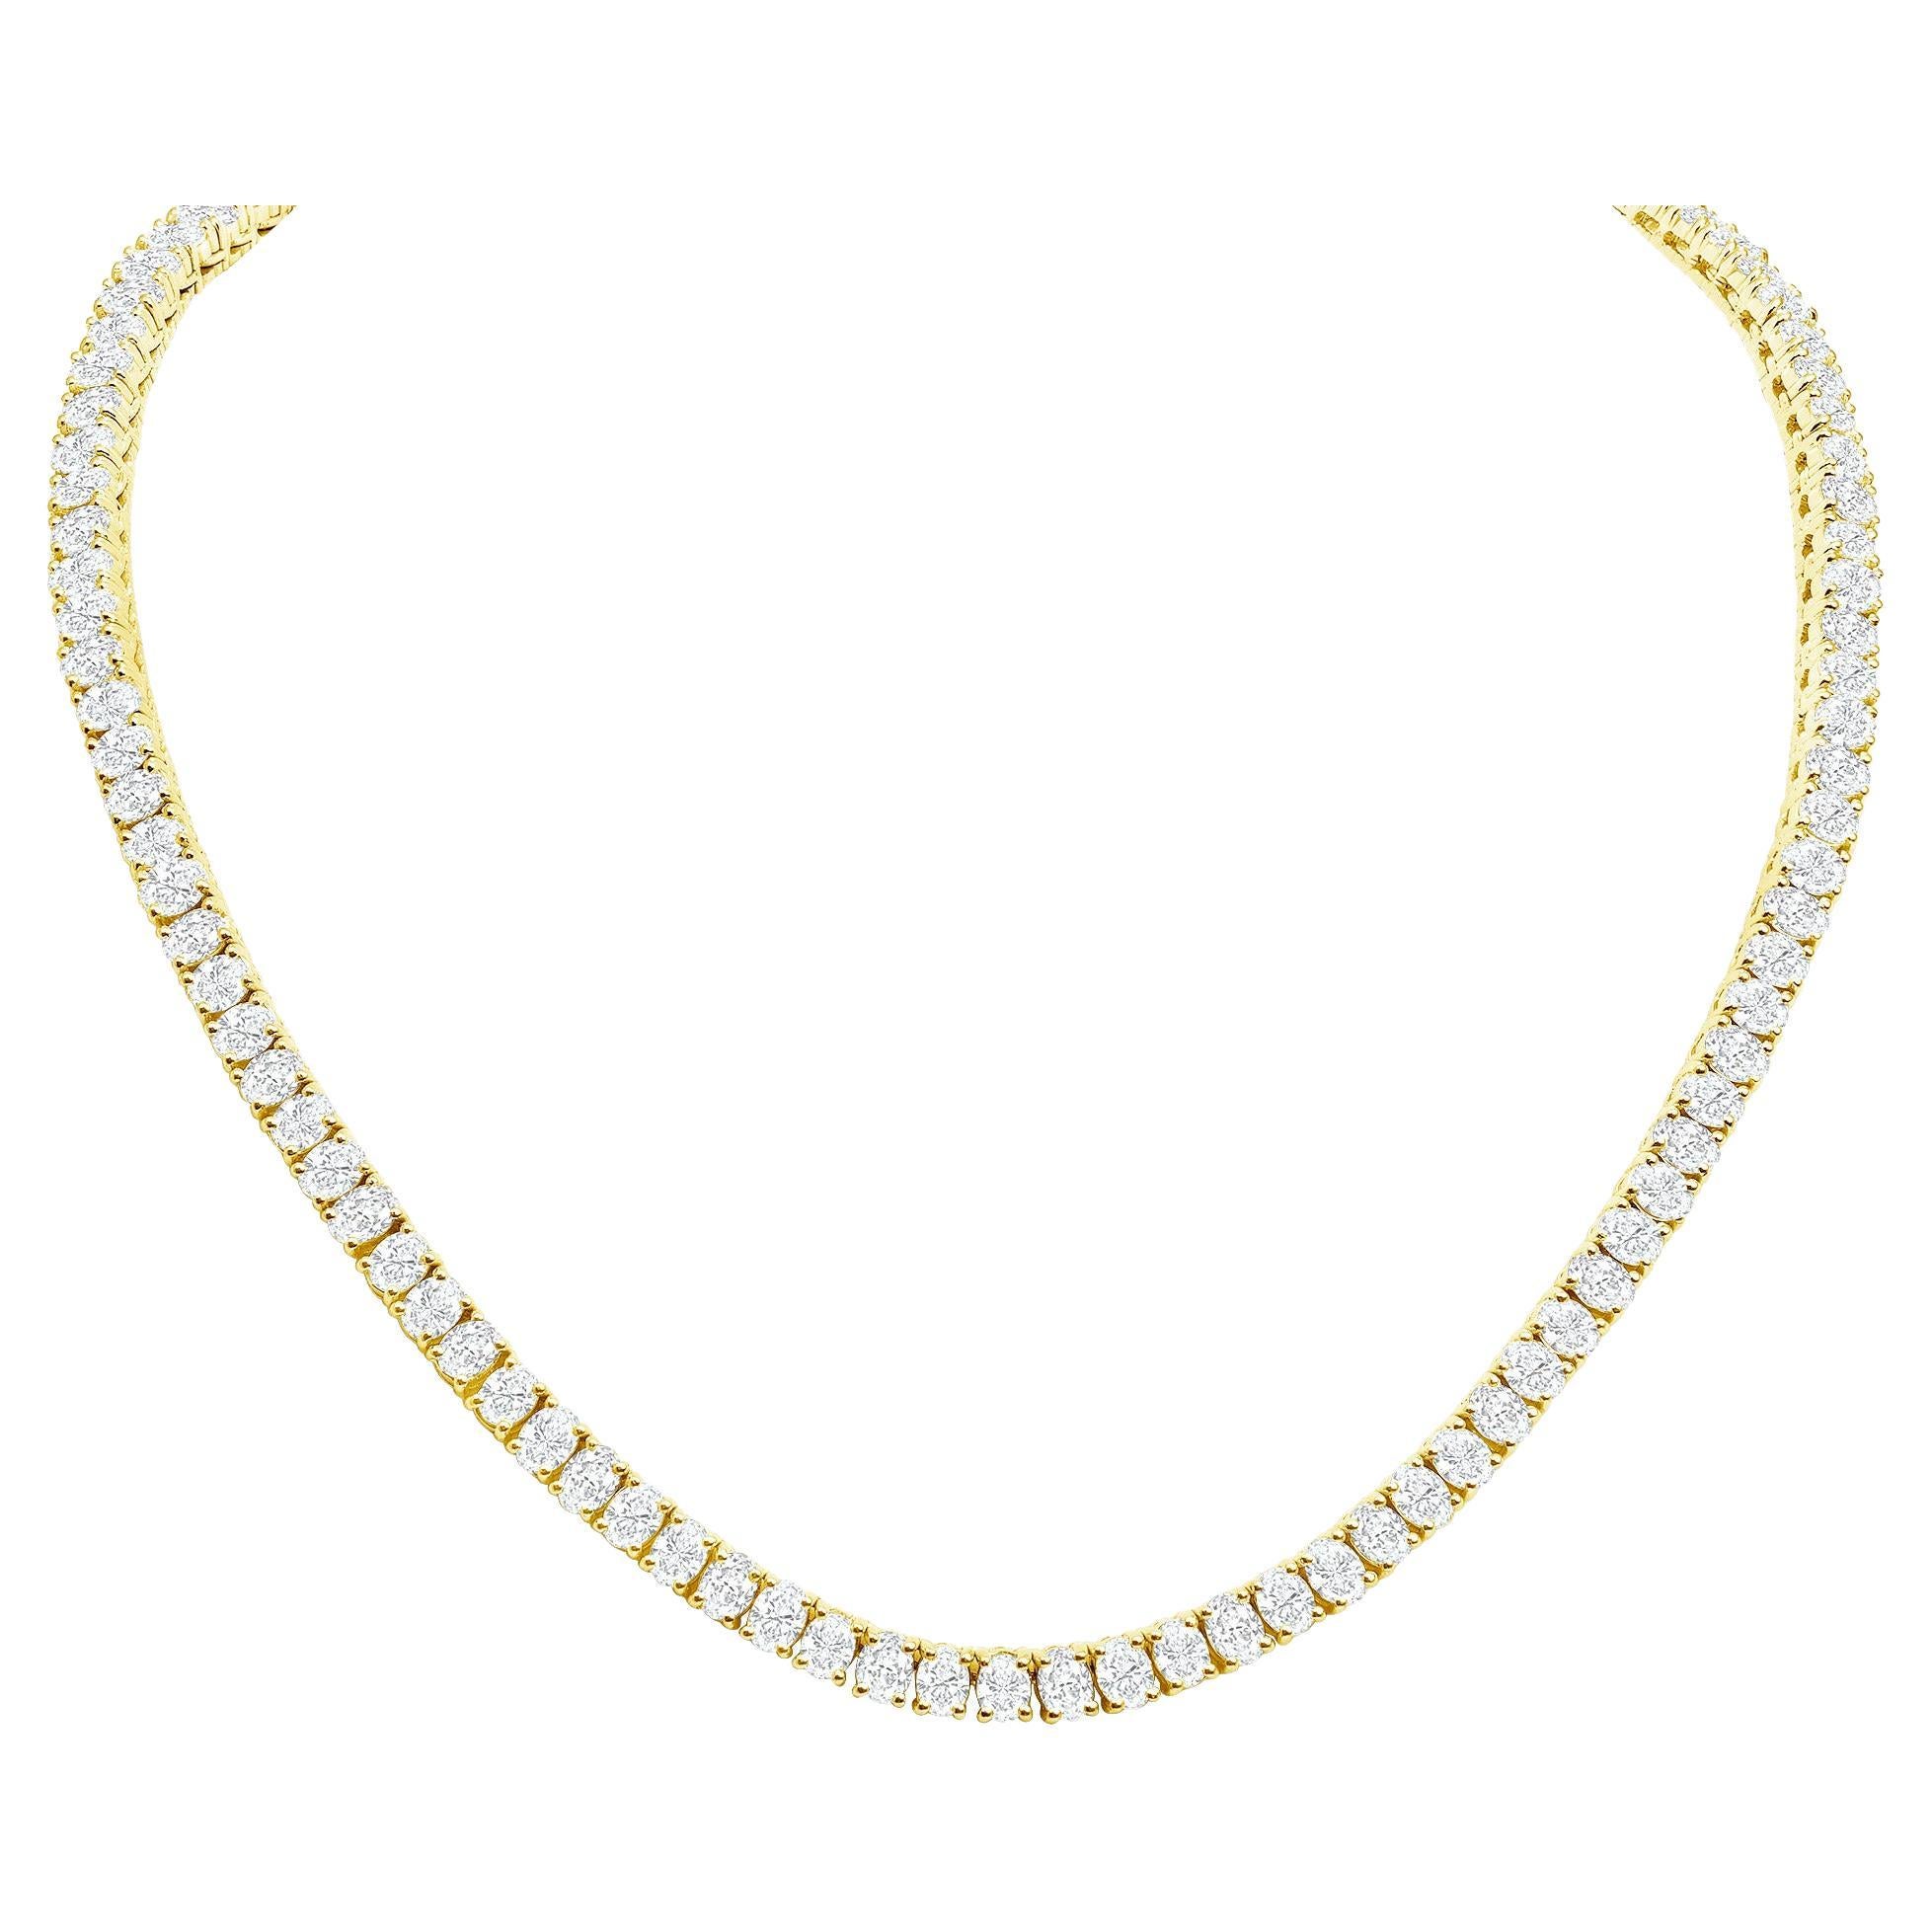 This diamond tennis necklace features beautifully cut Oval diamonds set gorgeously in 18k gold.

Metal: 18k Gold
Diamond Cut: Oval Natural (Not Lab Grown or Moissanite) 
Total Approx. Diamond Carats: 20
Diamond Clarity: VS
Diamond Color: F-G
Size: